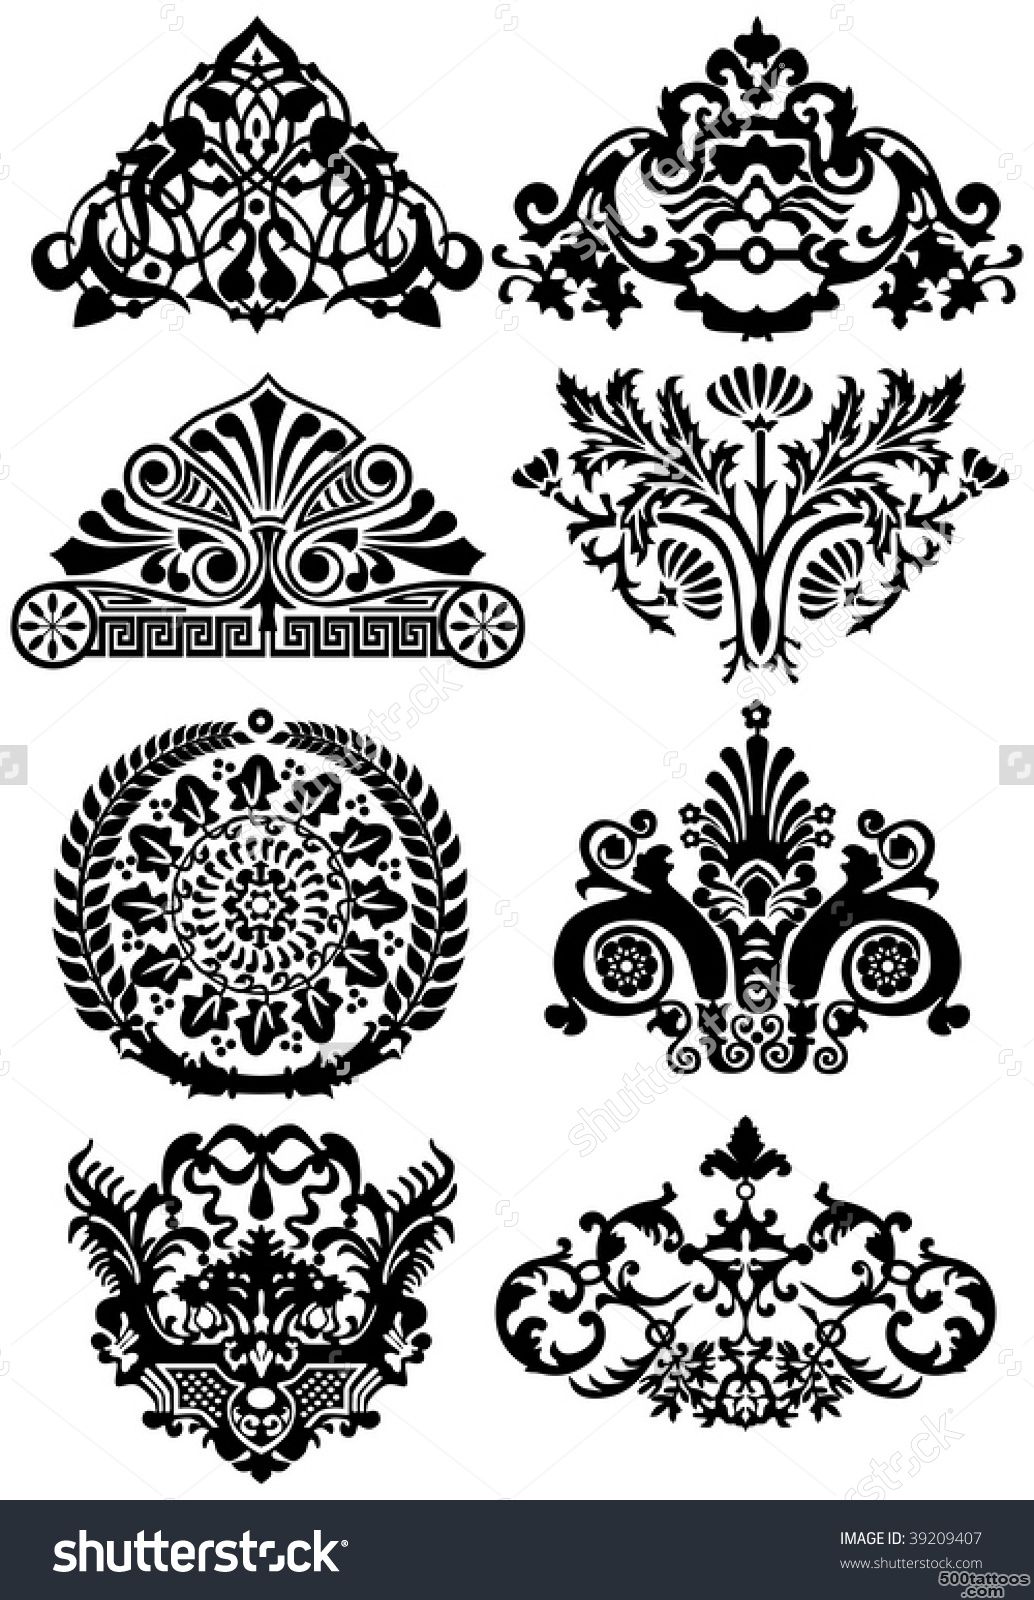 Ancient Tattoos And Ornaments Stock Vector Illustration 39209407 ..._17